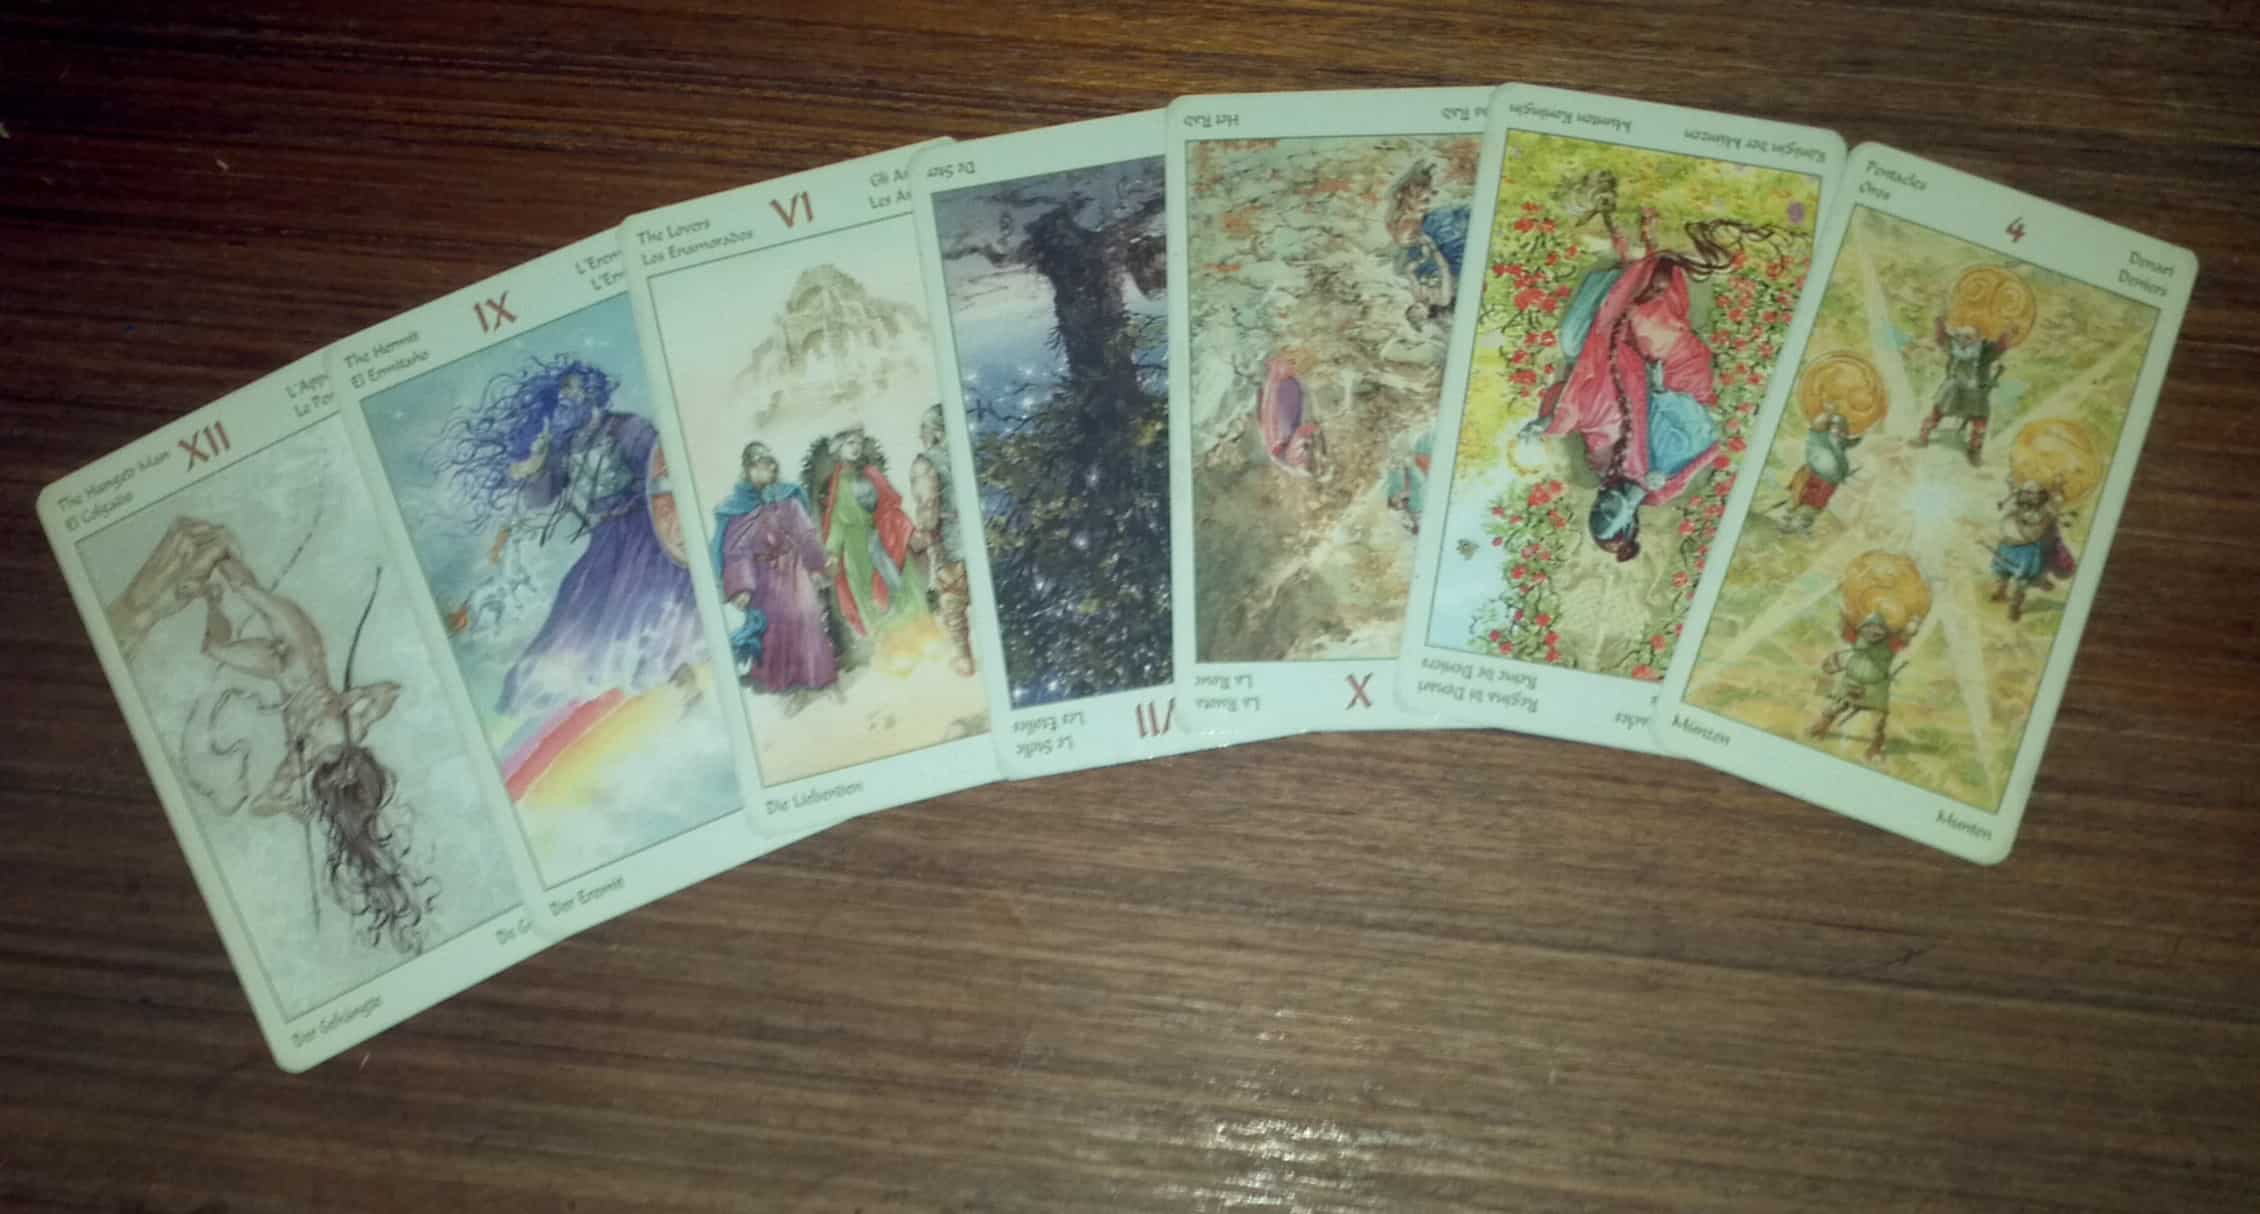 What would help me the most in finishing my book, a Tarot reading